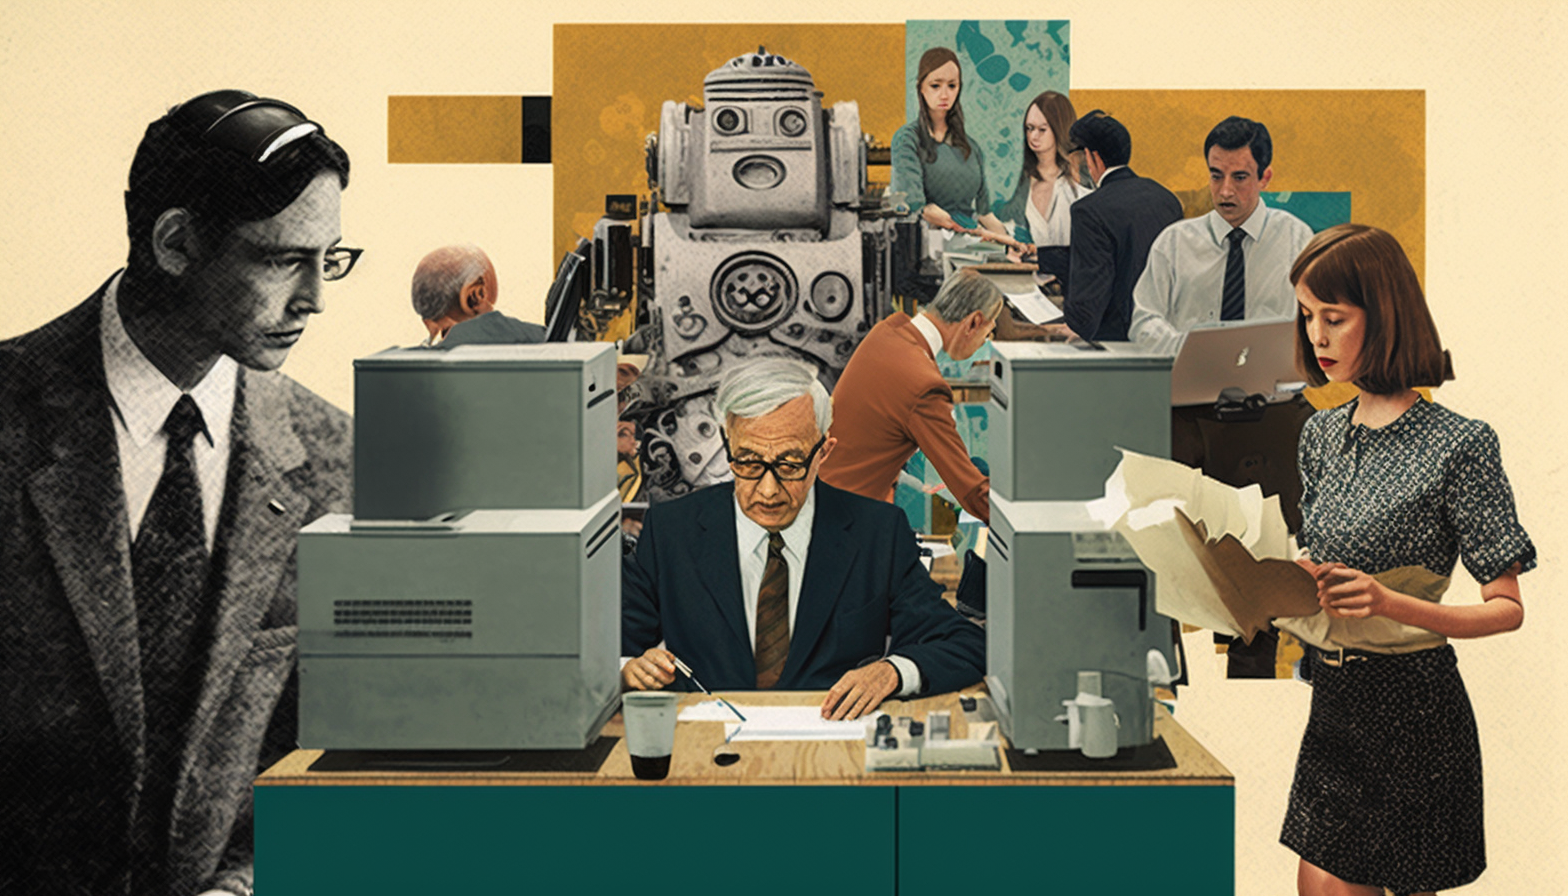 An illustrative image showing a collage of workers with documents, desks, and other office supplies, created by the AI tool Midjourney.